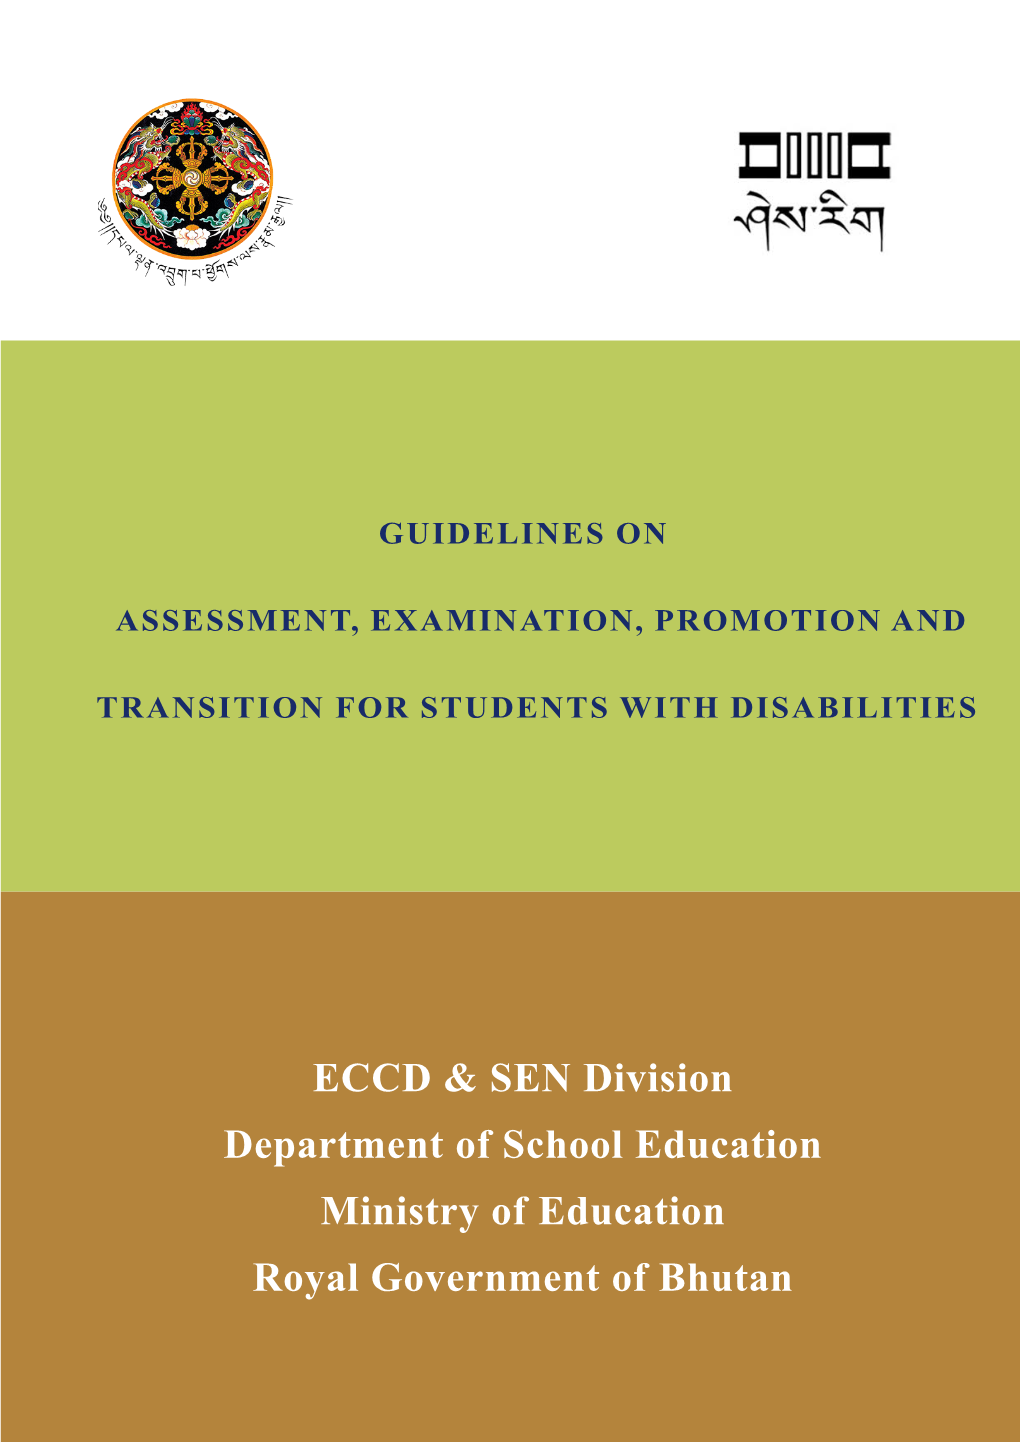 Guidelines on Assessment, Examination